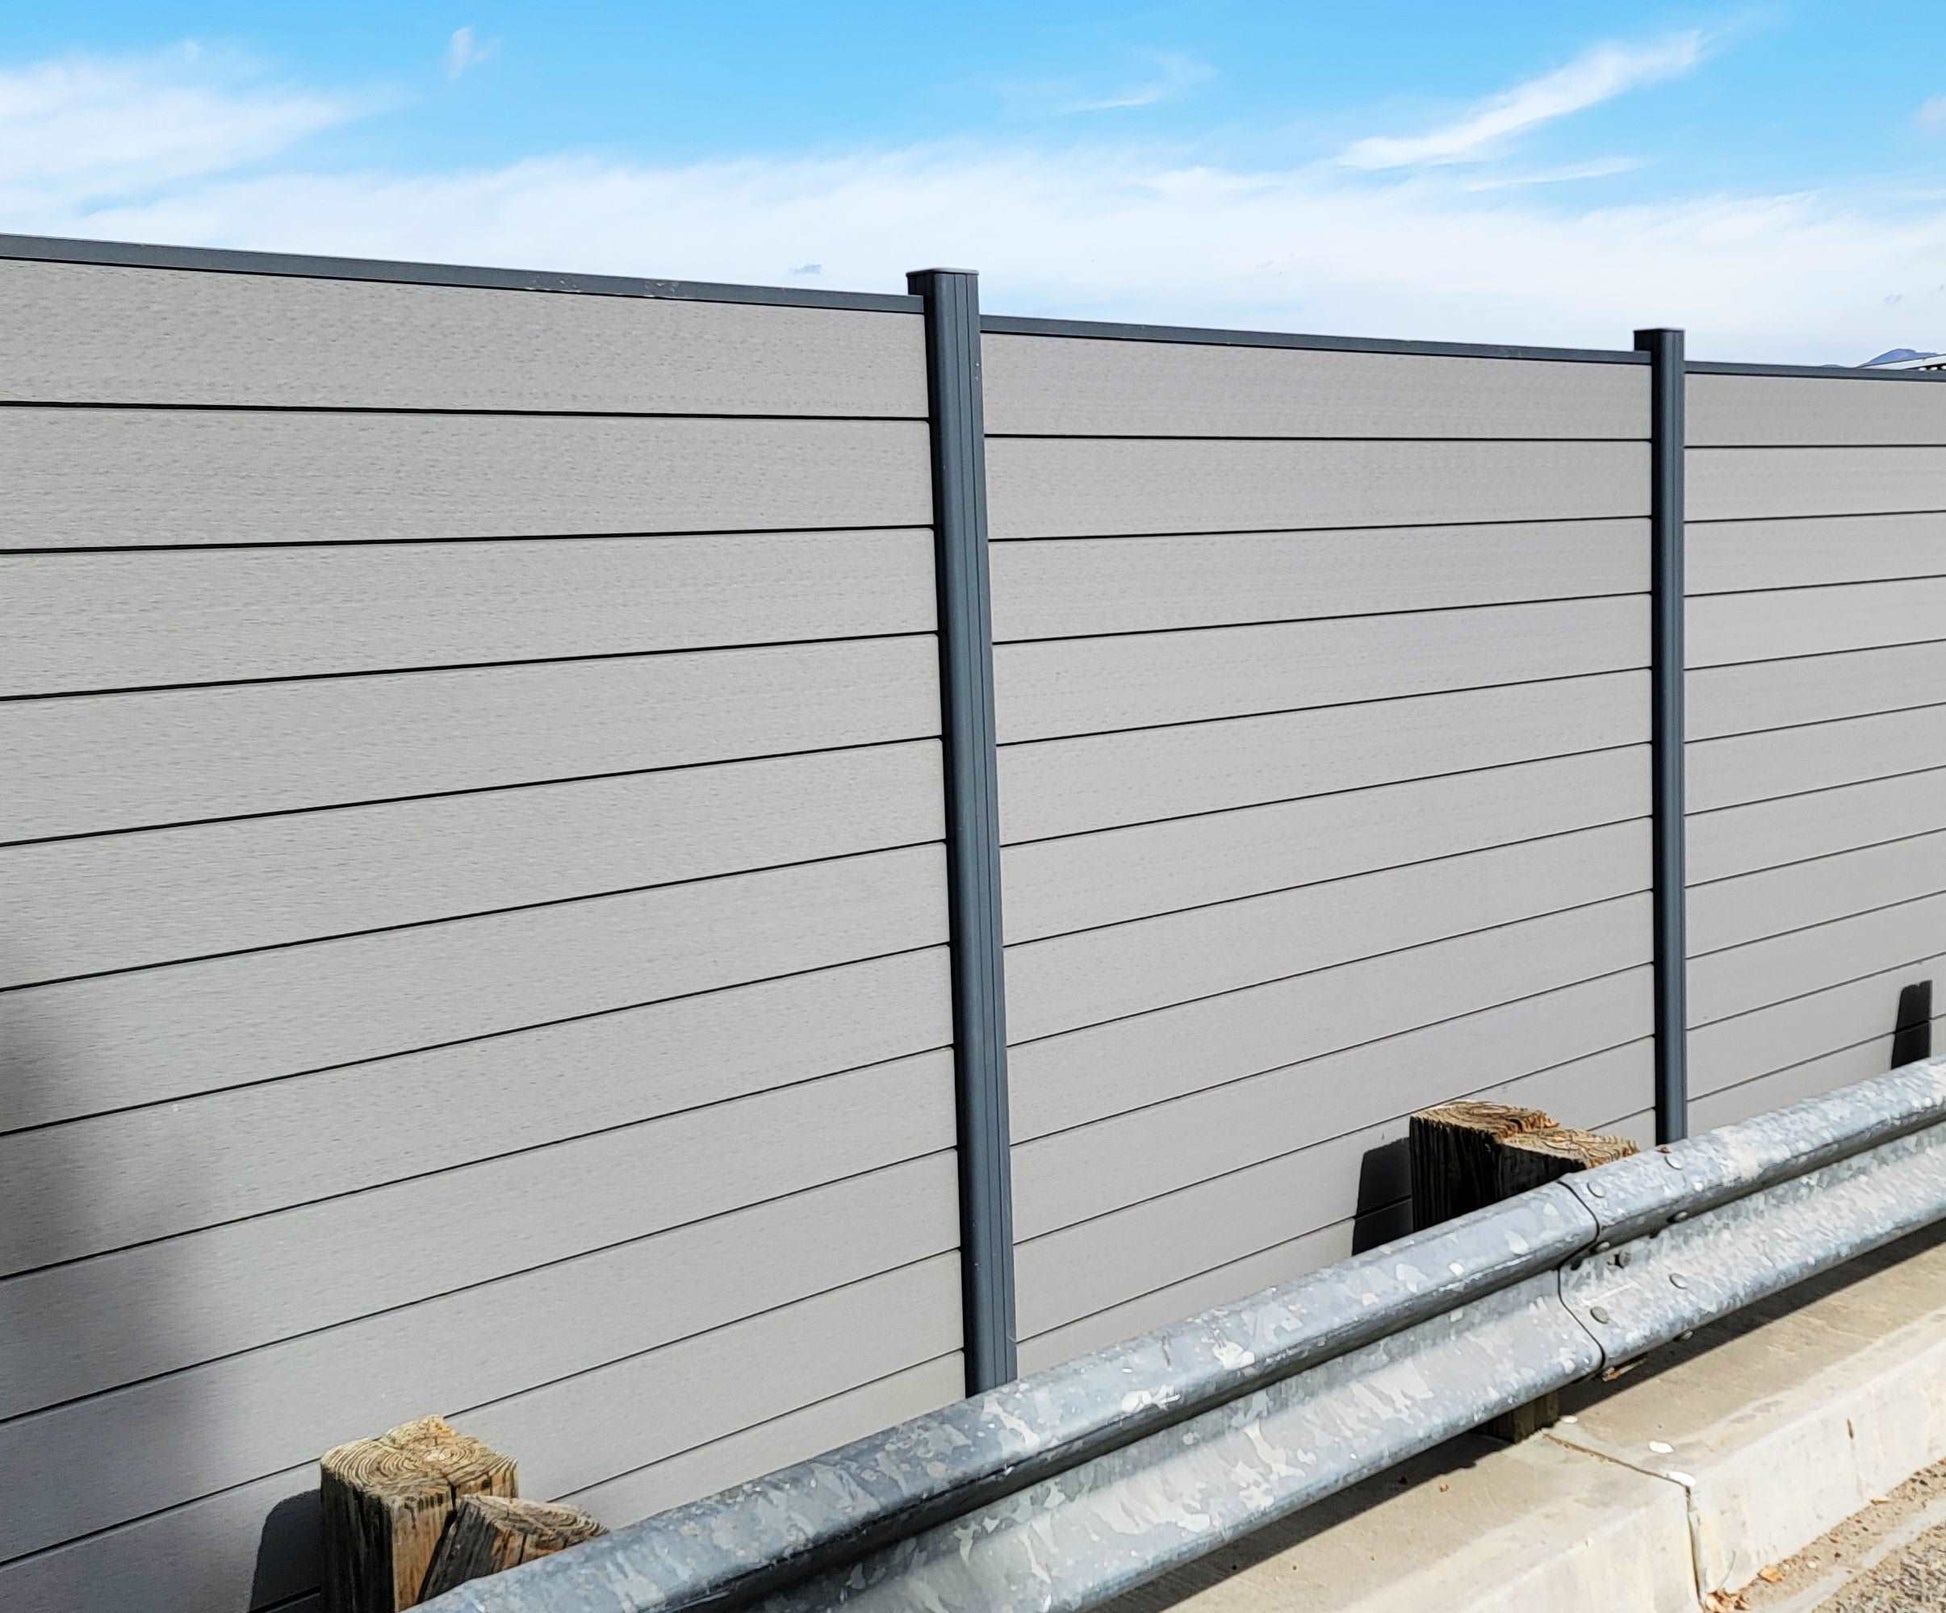 Wood Plastic Composite (WPC) Fencing System - 6ft x 6ft Panel Kit - Easy Installation Fence Panel for Backyard - Privacy Design Fencing Panels - Color: Silver Gray